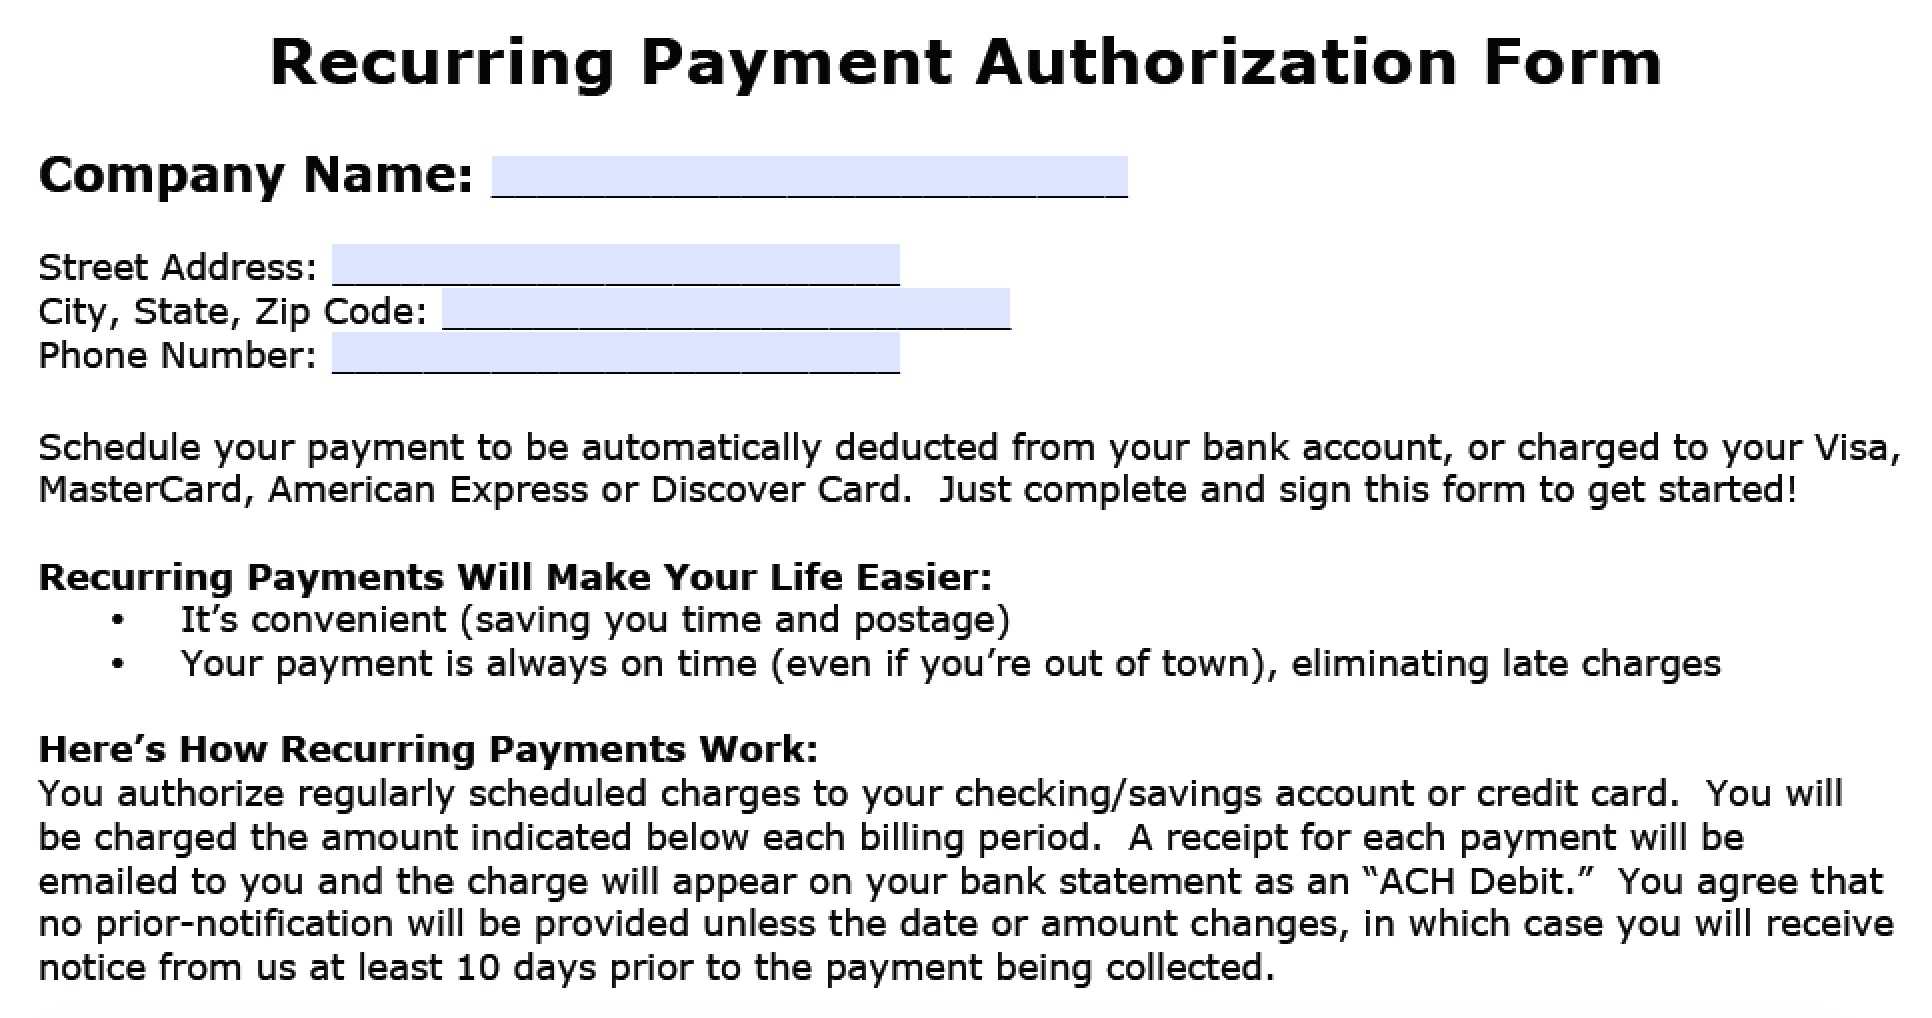 Download Recurring Payment Authorization Form Template Regarding Credit Card Billing Authorization Form Template